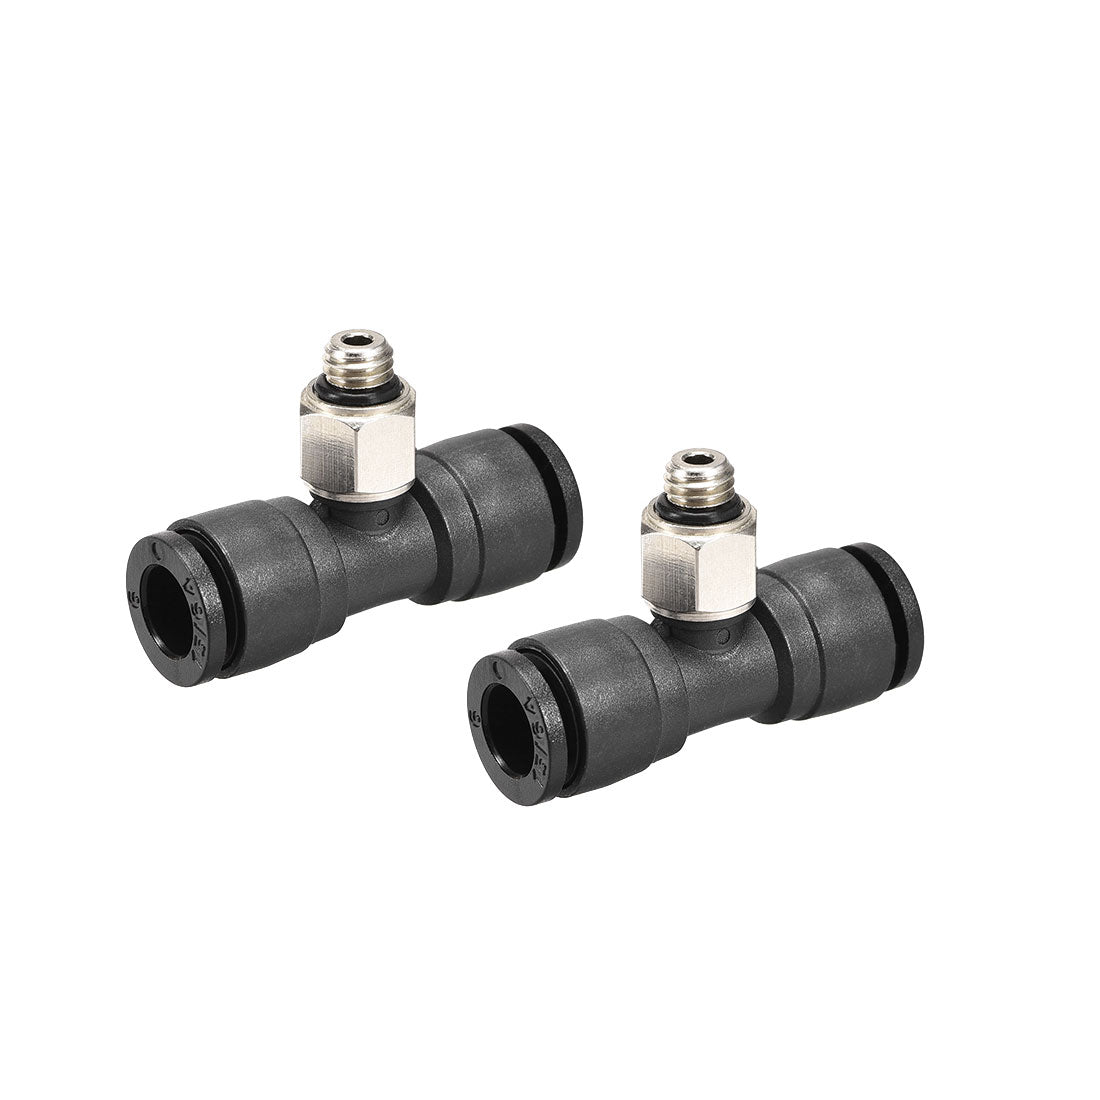 uxcell Uxcell Plastic Tee Push To Connect Tube Fittings 6mm x M5 Male Thread Push Lock 2pcs